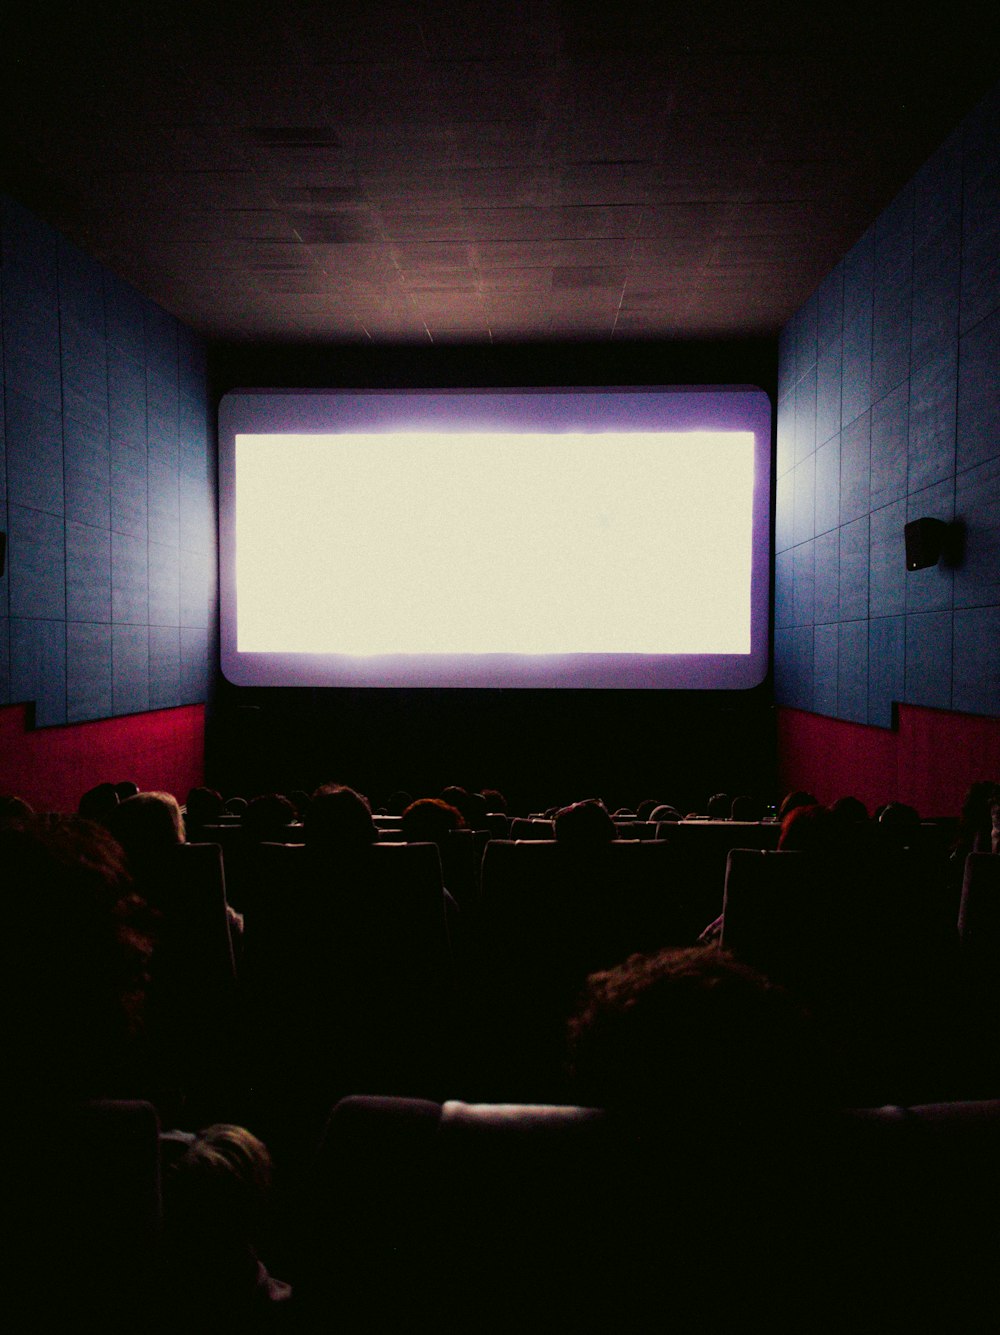 a large screen in a dark room with people watching it